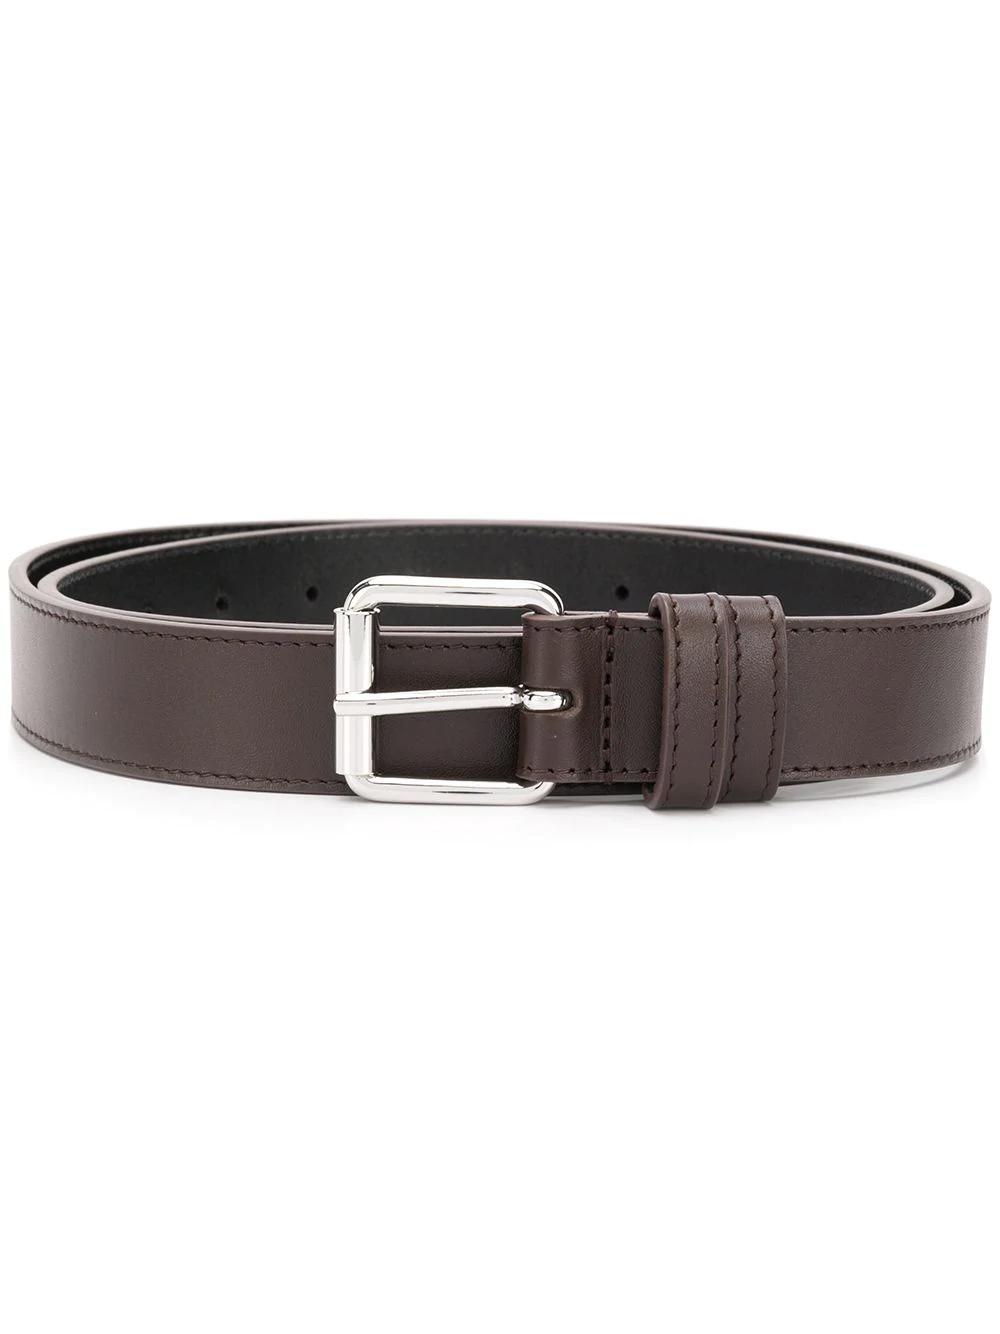 Brown Classic Leather Belt by COMME DES GARCONS | jellibeans